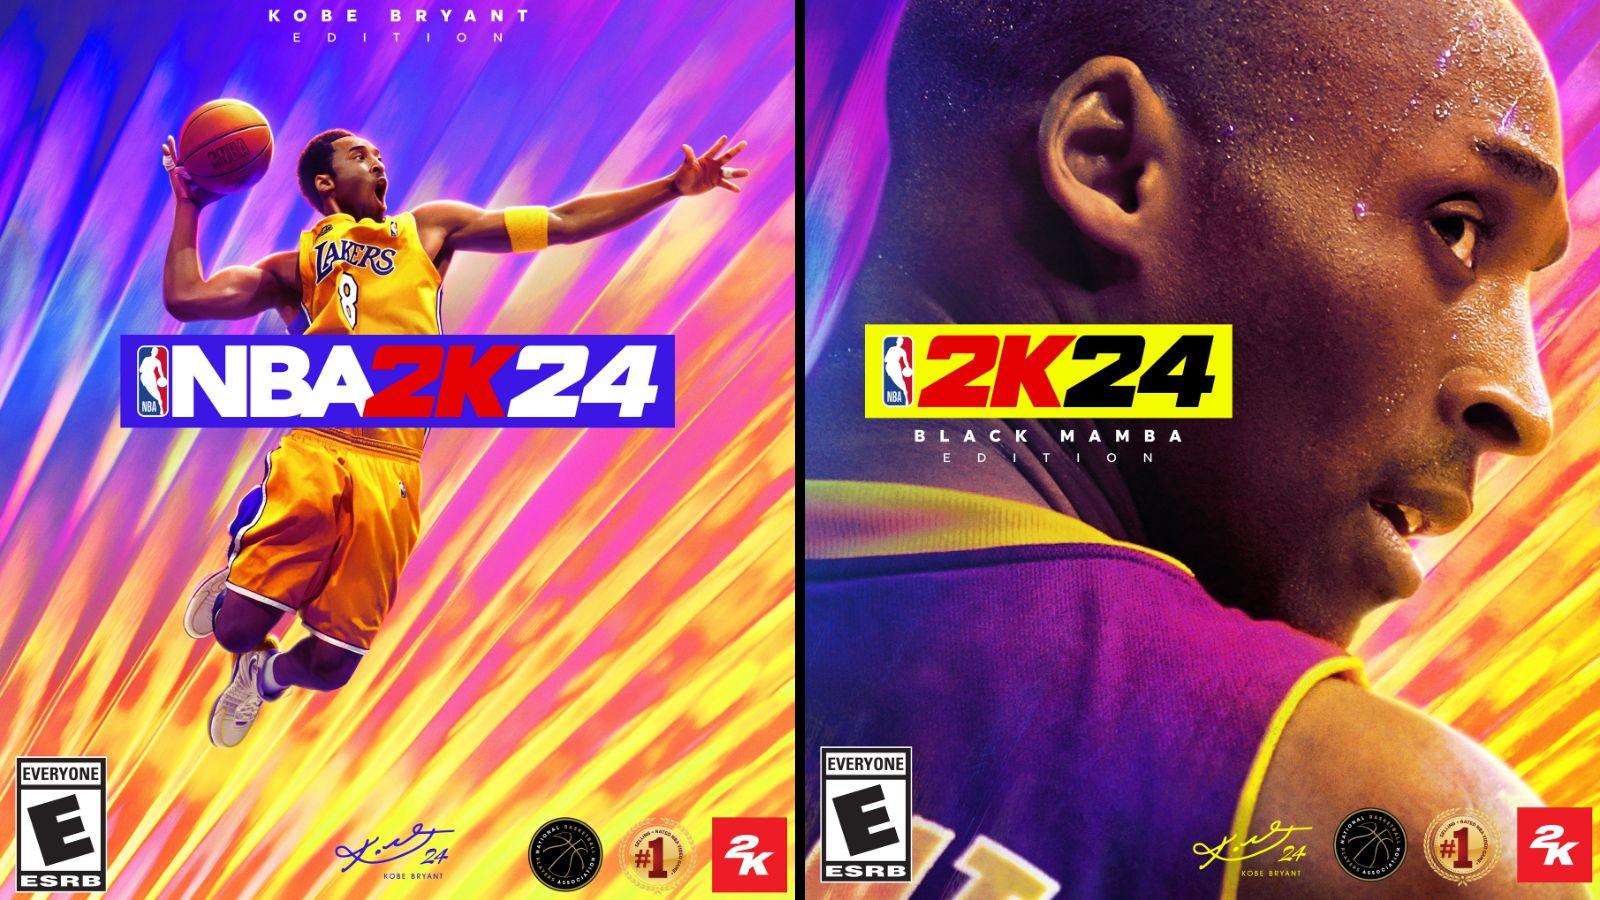 NBA 2K24 honors the iconic Kobe Bryant as this year’s cover athlete ...